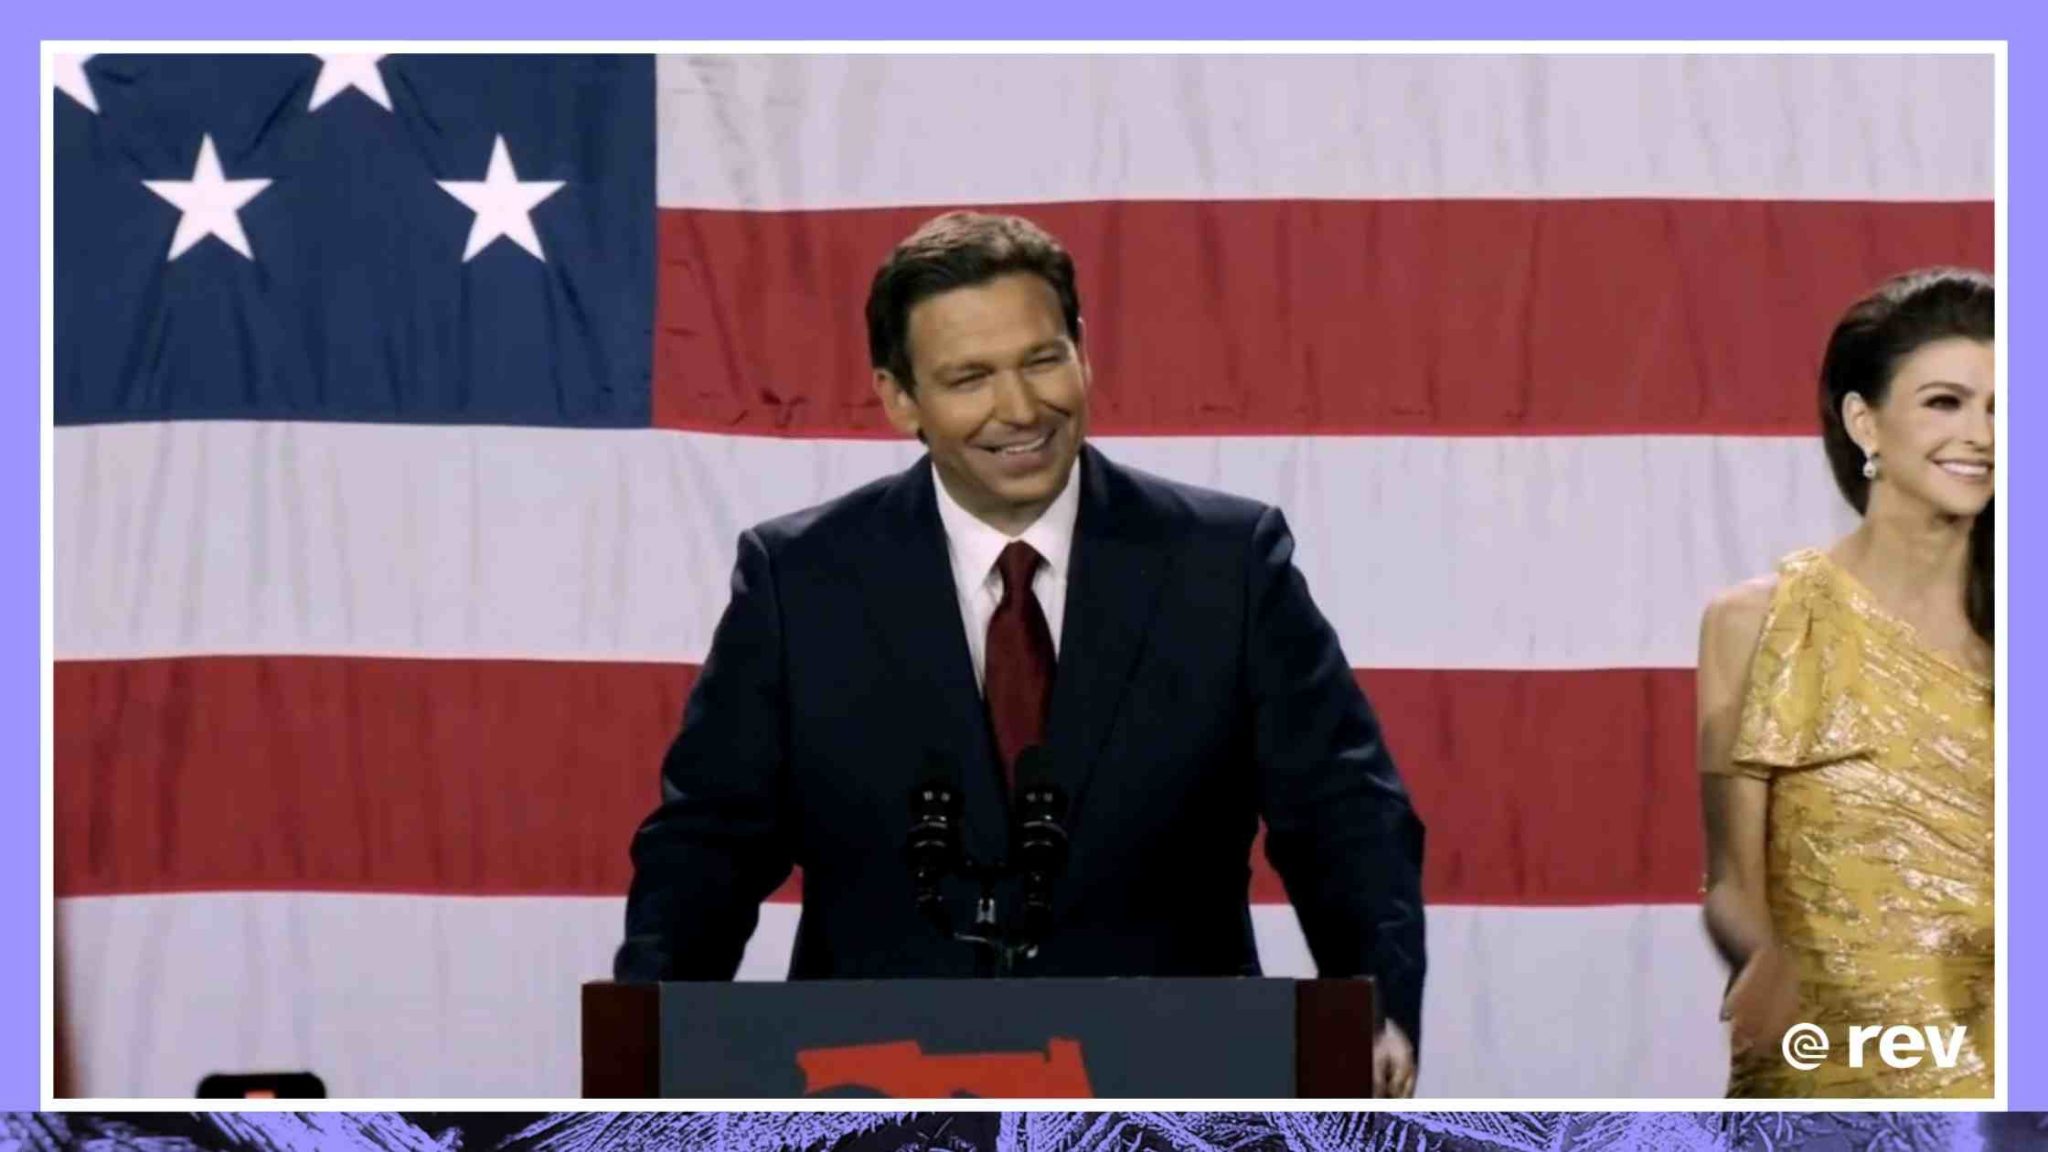 Ron DeSantis gives victory speech after re-election as Florida Governor Transcript